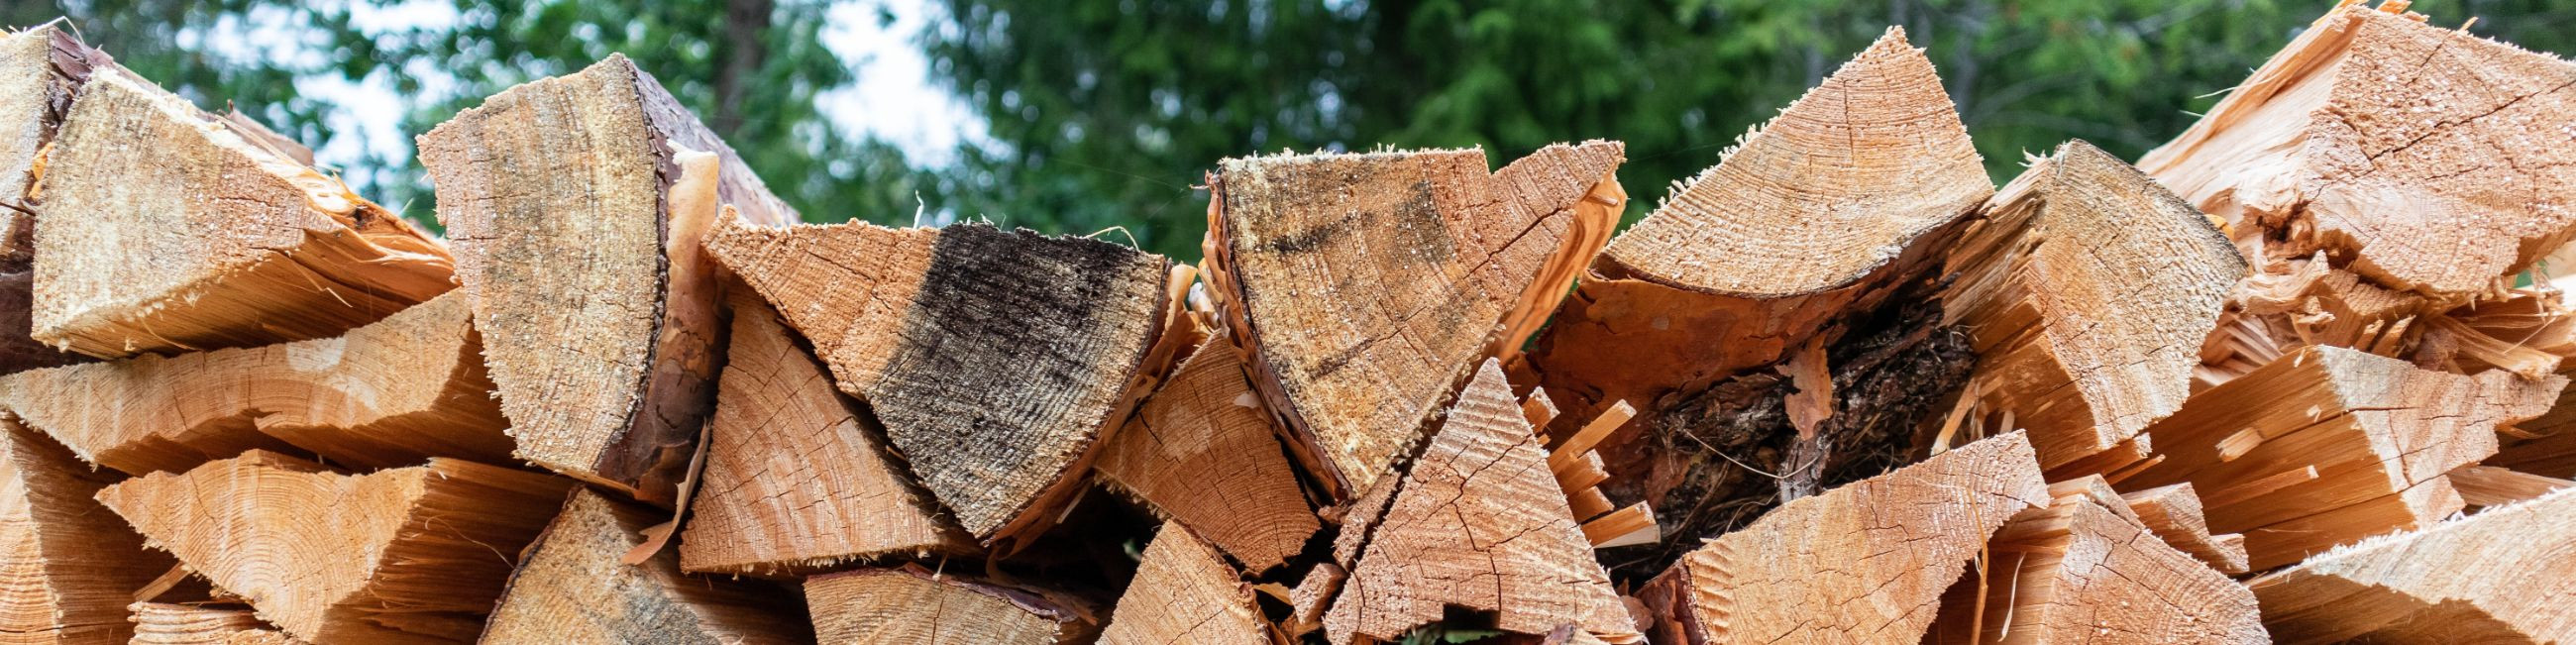 firewood for heating, firewood for sale, heating wood production, logging, Storage, Transport, Broken firewood, breaking of trees